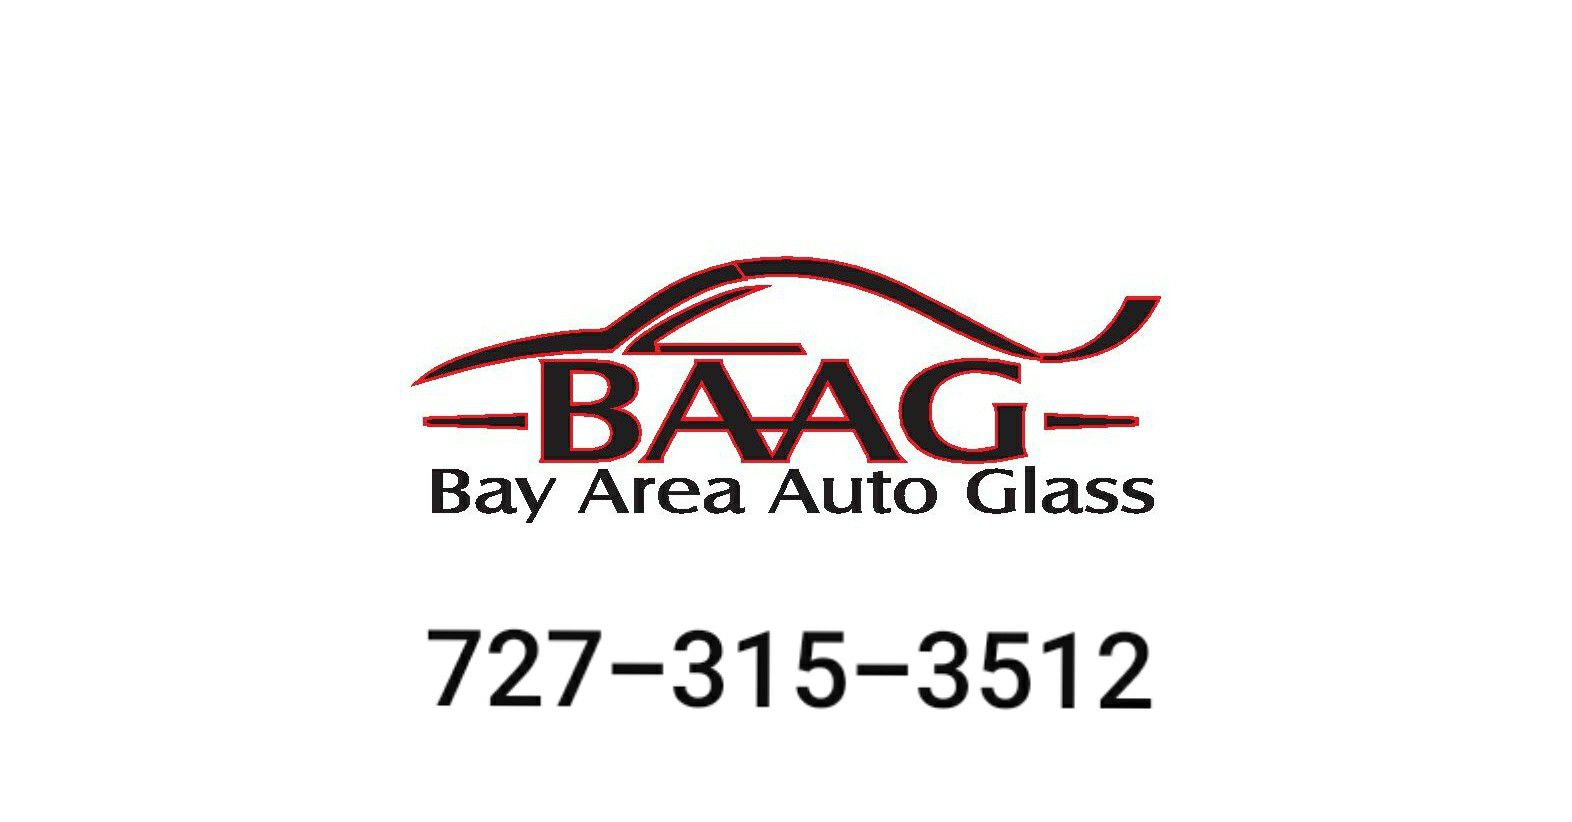 Windshield damage? Call today to have it replaced tomorrow.